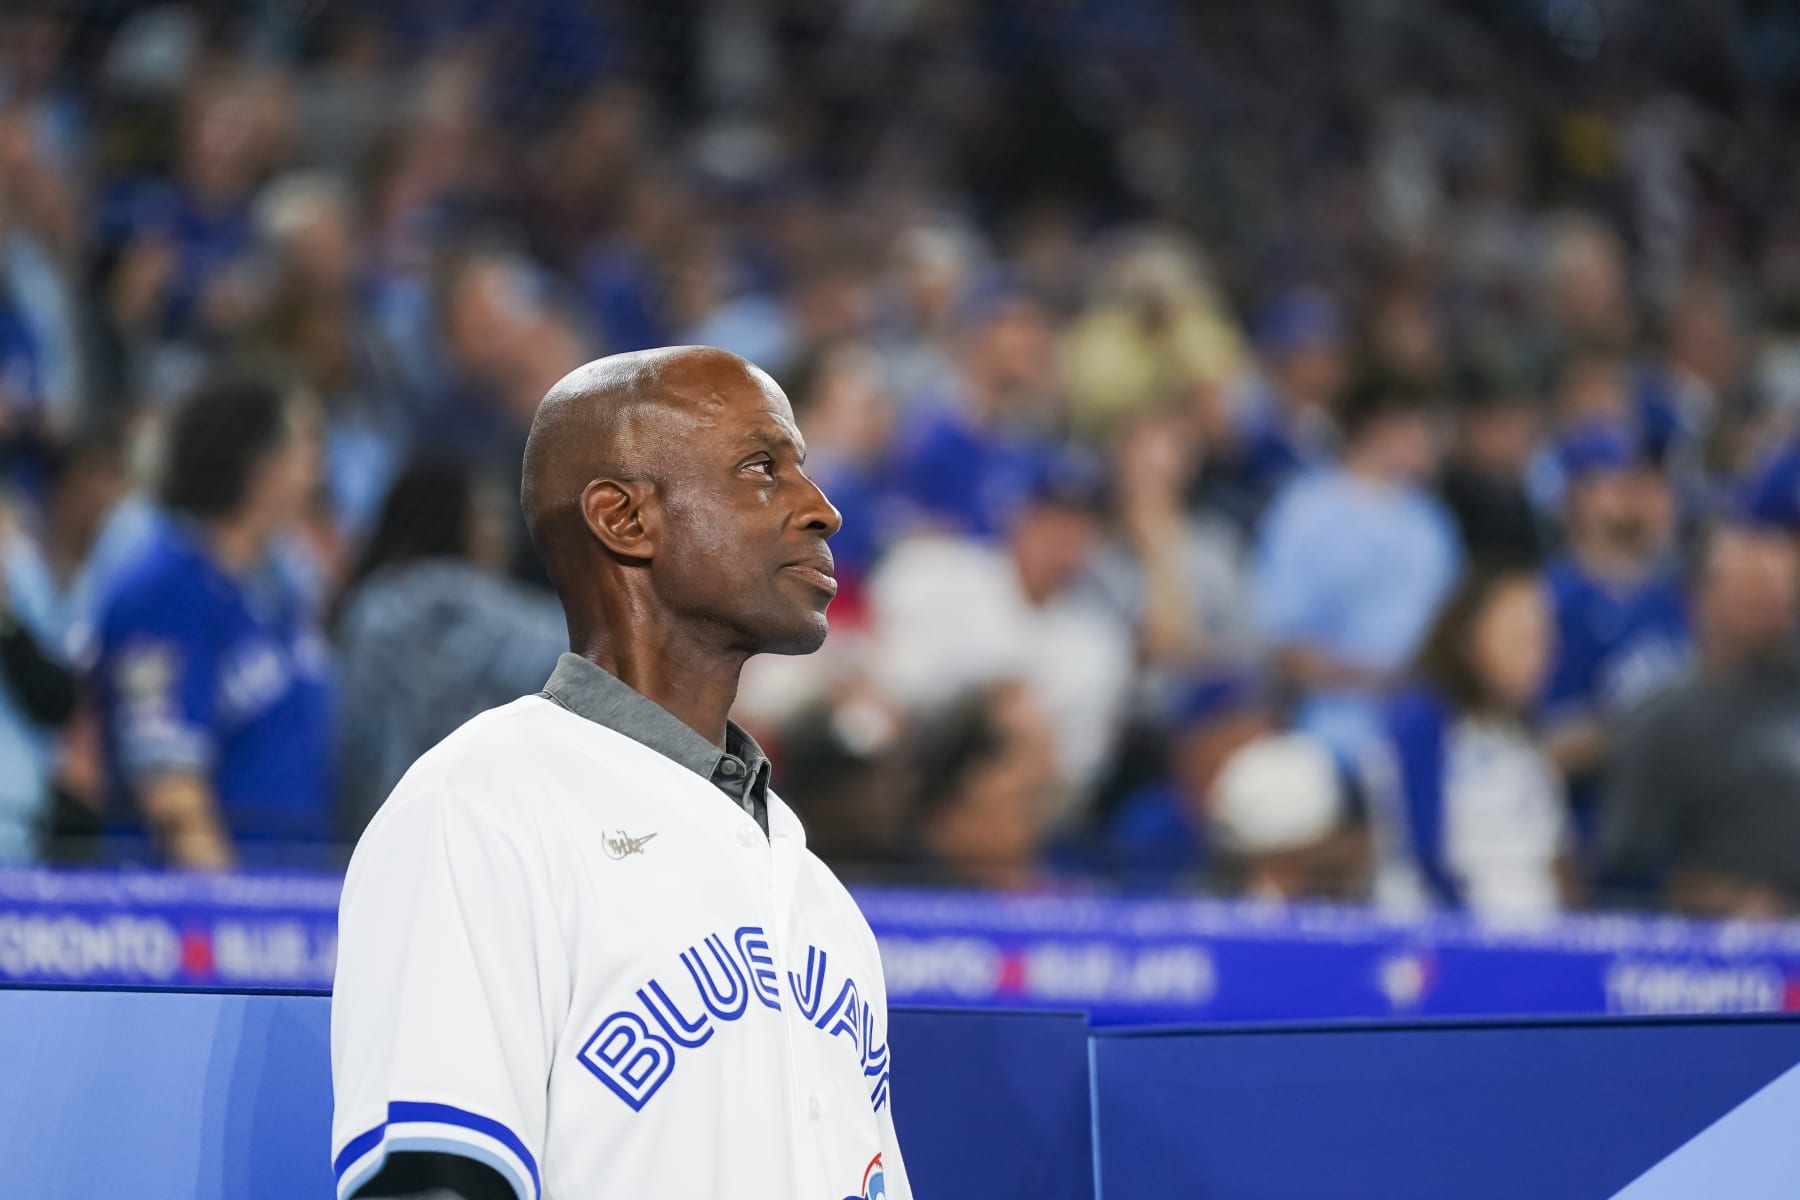 Braves, Blue Jays' Great Fred McGriff Elected to Baseball Hall of